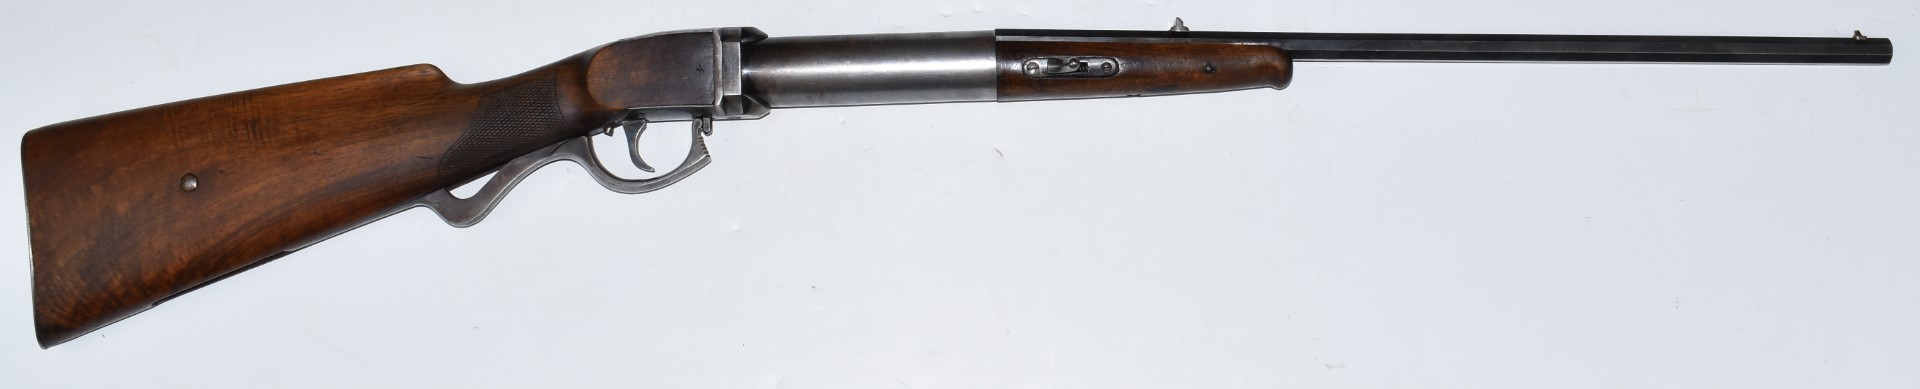 Oscar Will Bugelspanner .177 underlever air rifle with chequered grip, metal butt plate, - Image 2 of 8